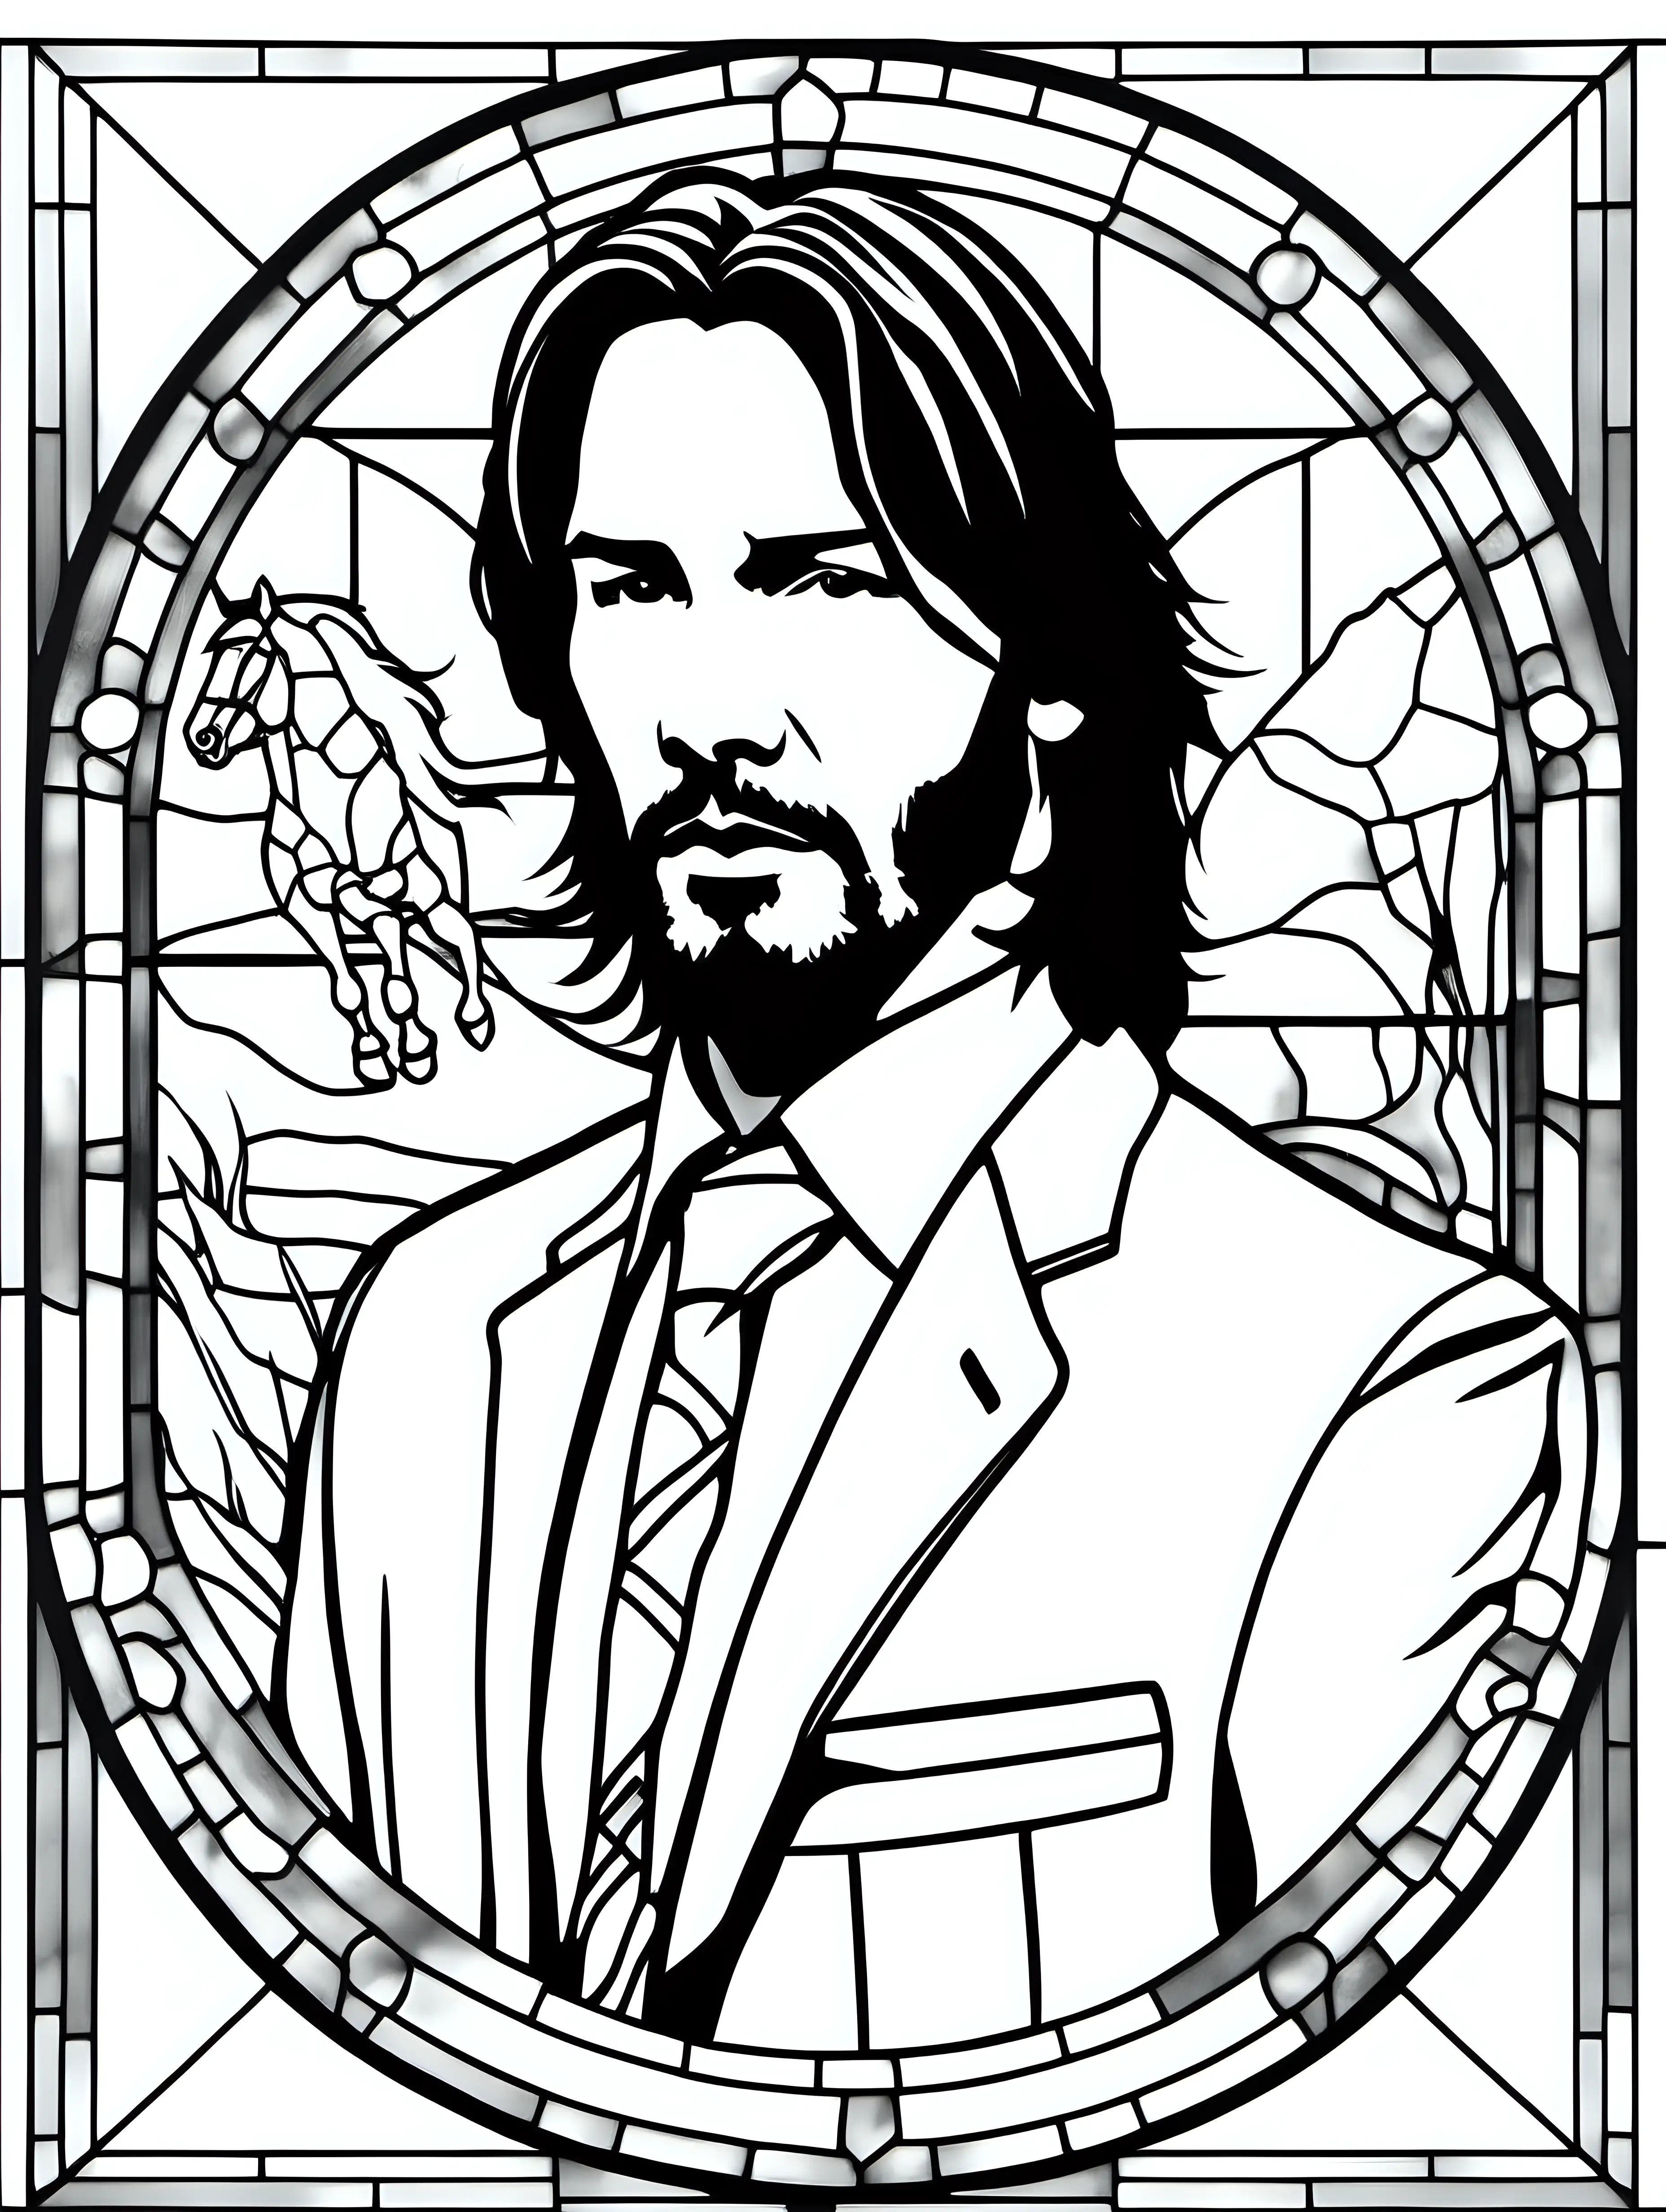 Young Keanu Reeves Adult Coloring Page Stained Glass Wild Stallion Theme